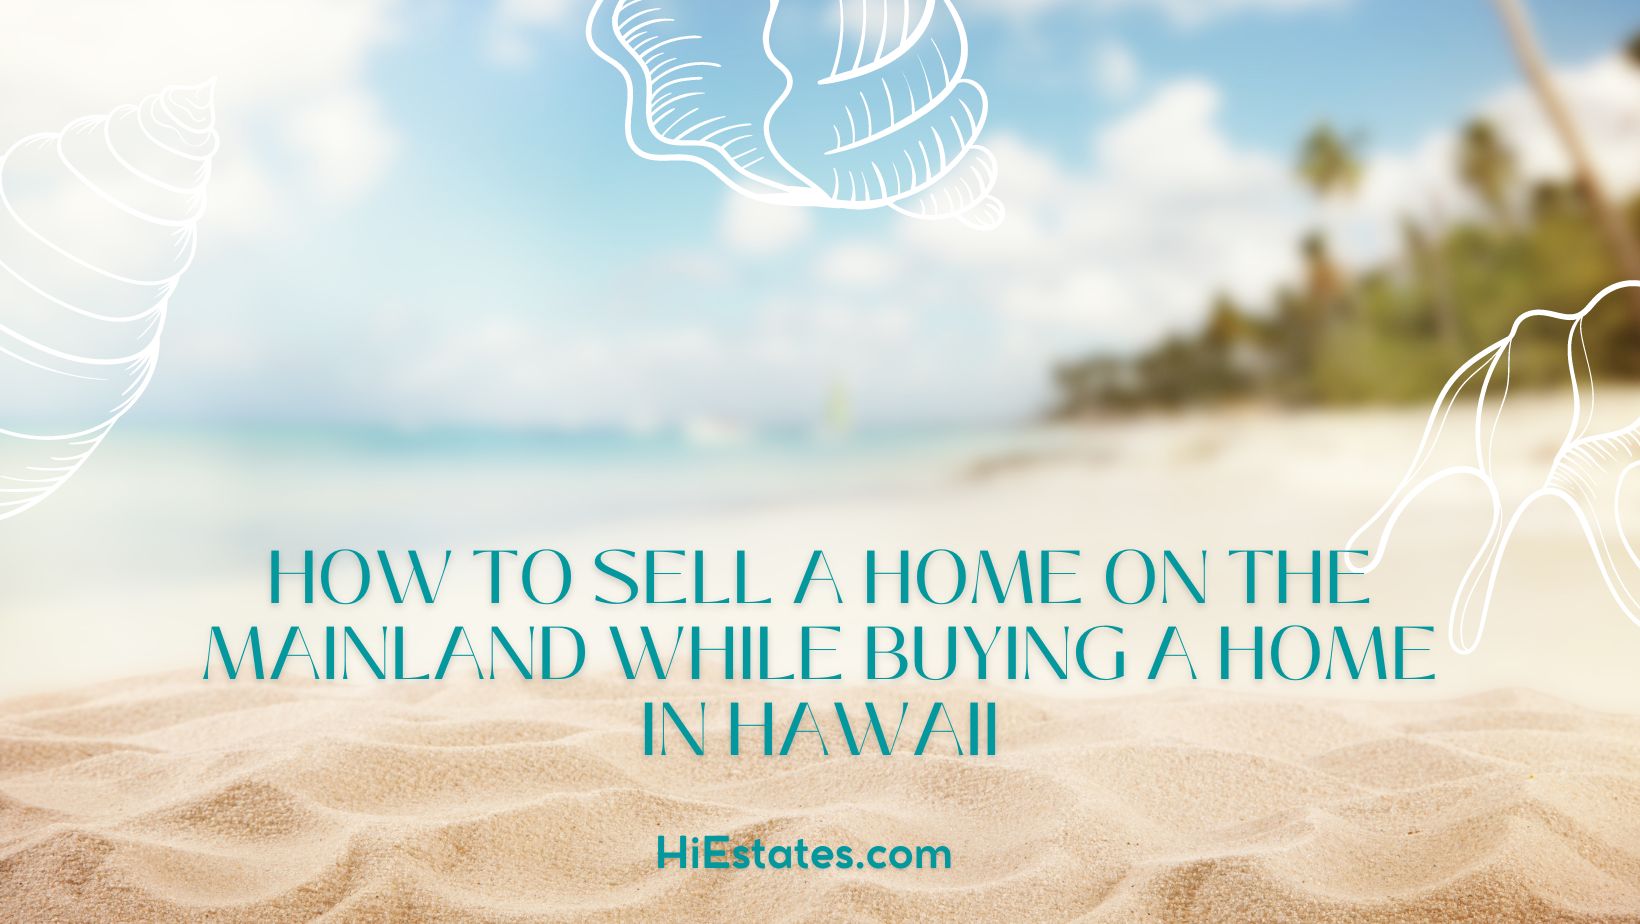 How to Sell a Home on the Mainland while Buying a Home in Hawaii